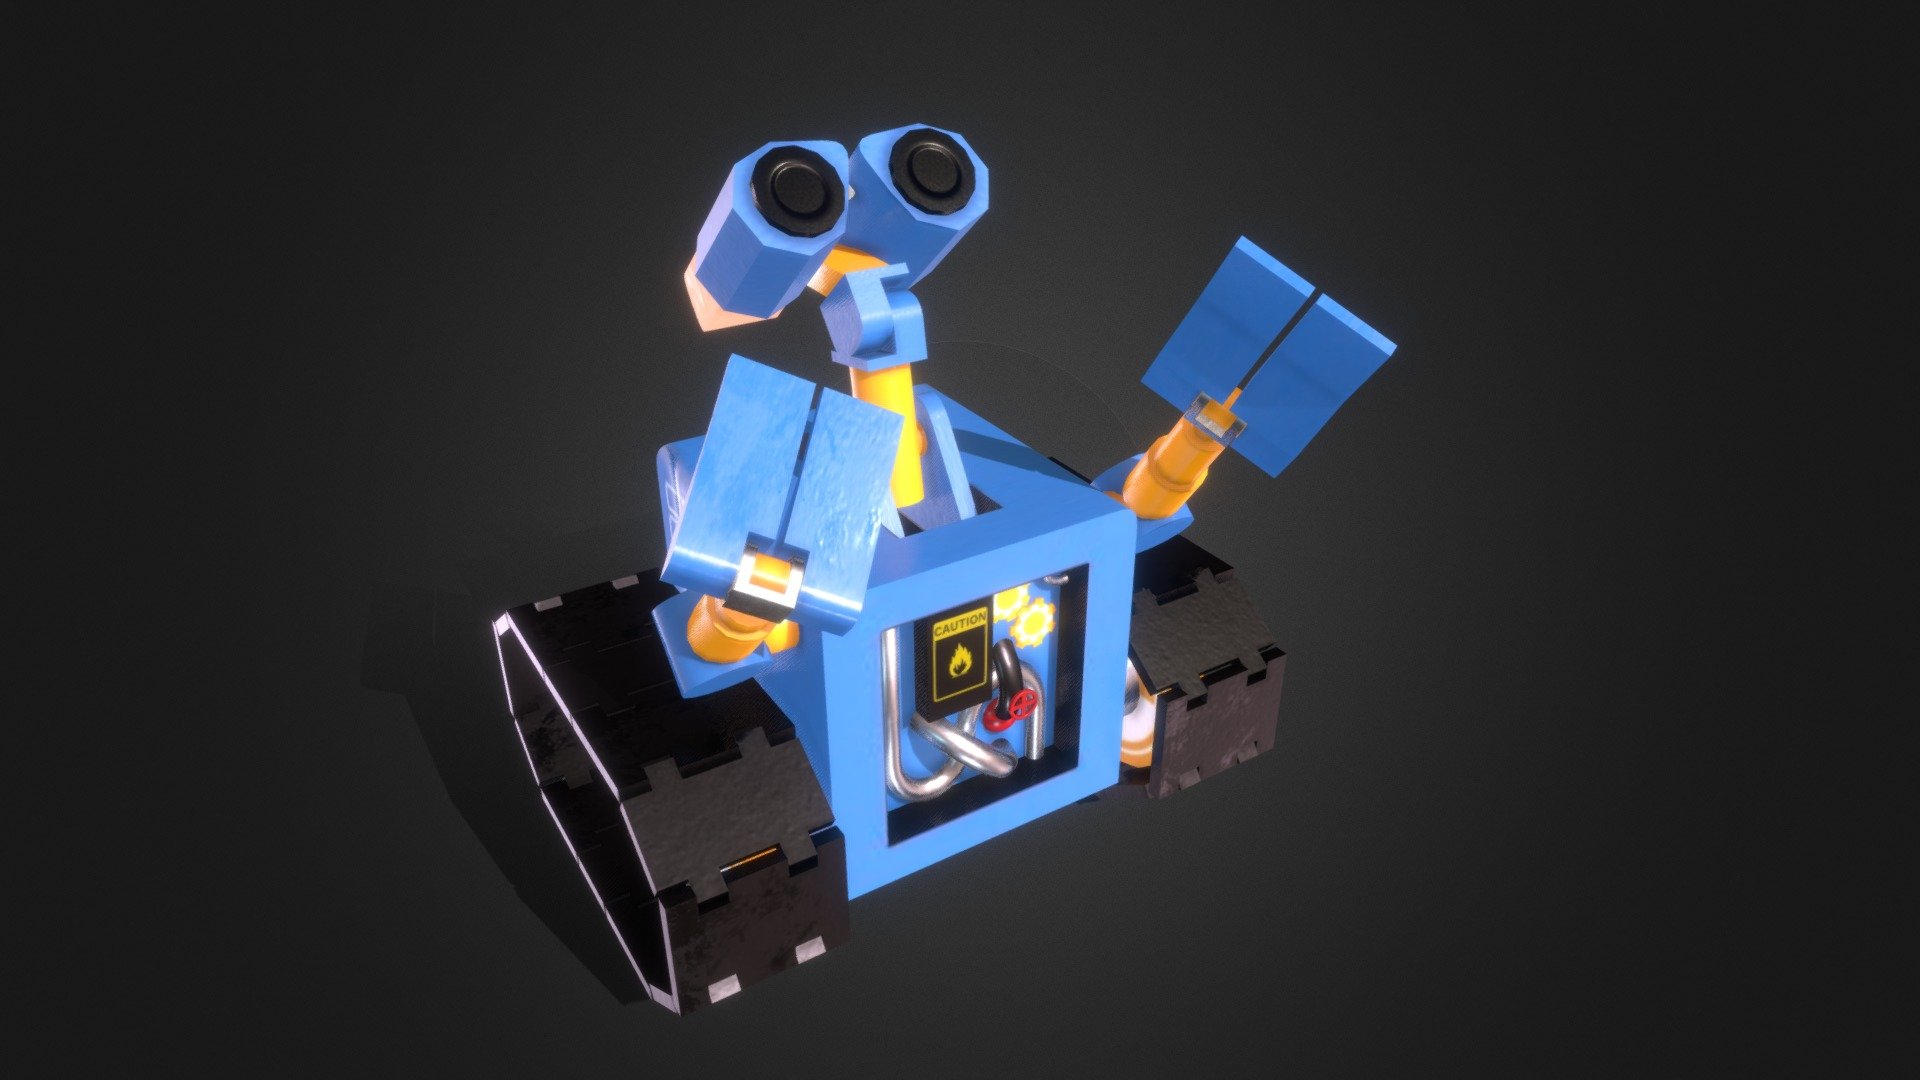 School Project - Wall-E Inspired Robot Toy - 3D model by OliverSpenning 3d model